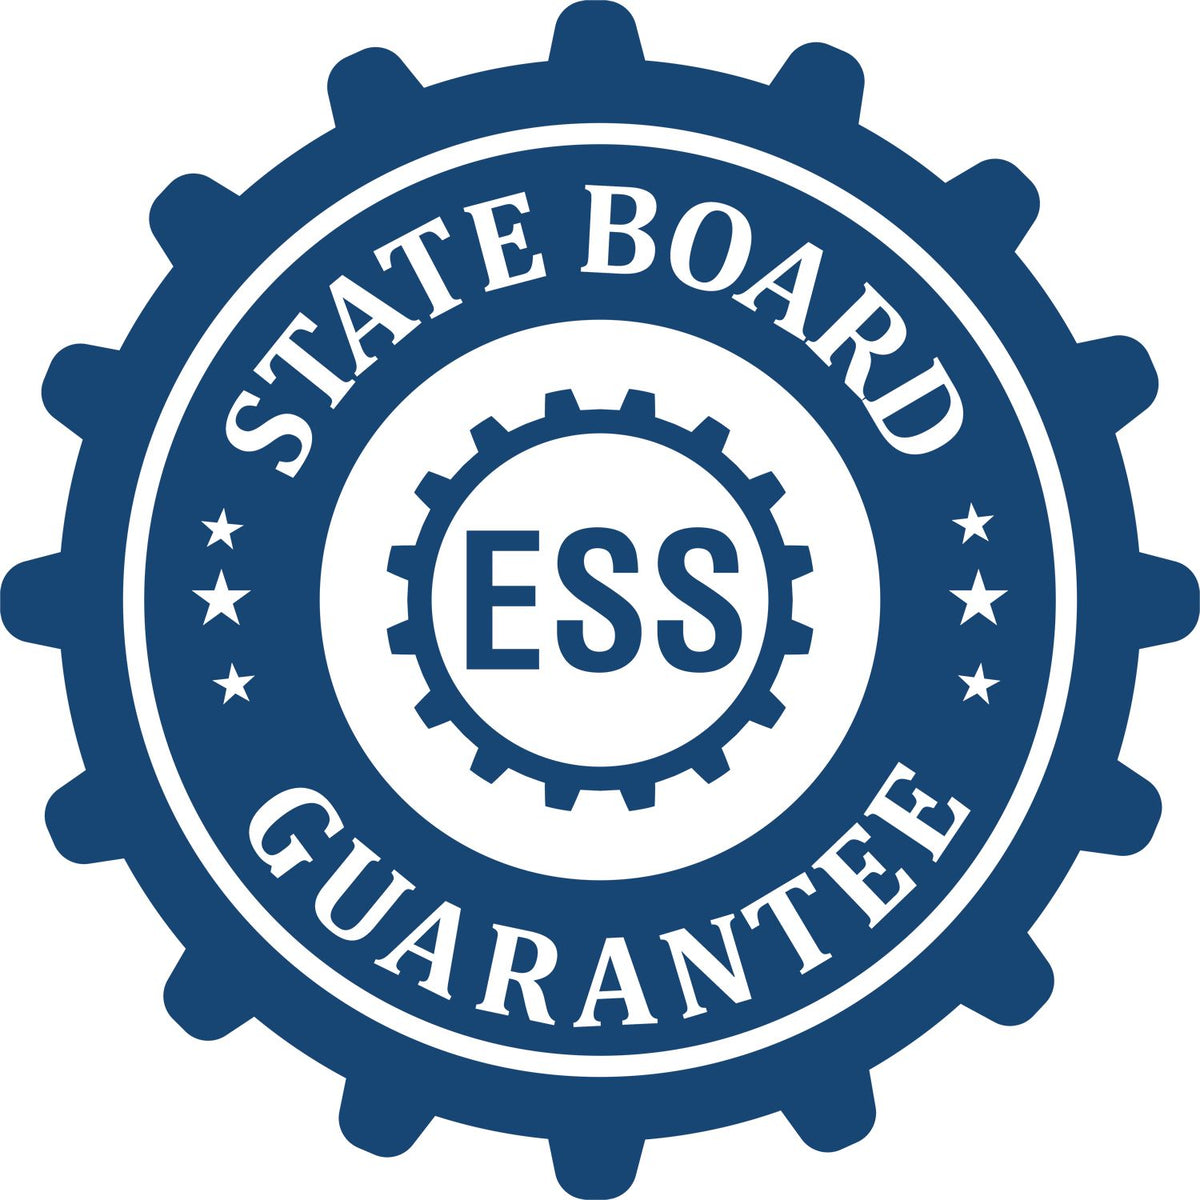 An emblem in a gear shape illustrating a state board guarantee for the Digital North Carolina PE Stamp and Electronic Seal for North Carolina Engineer product.